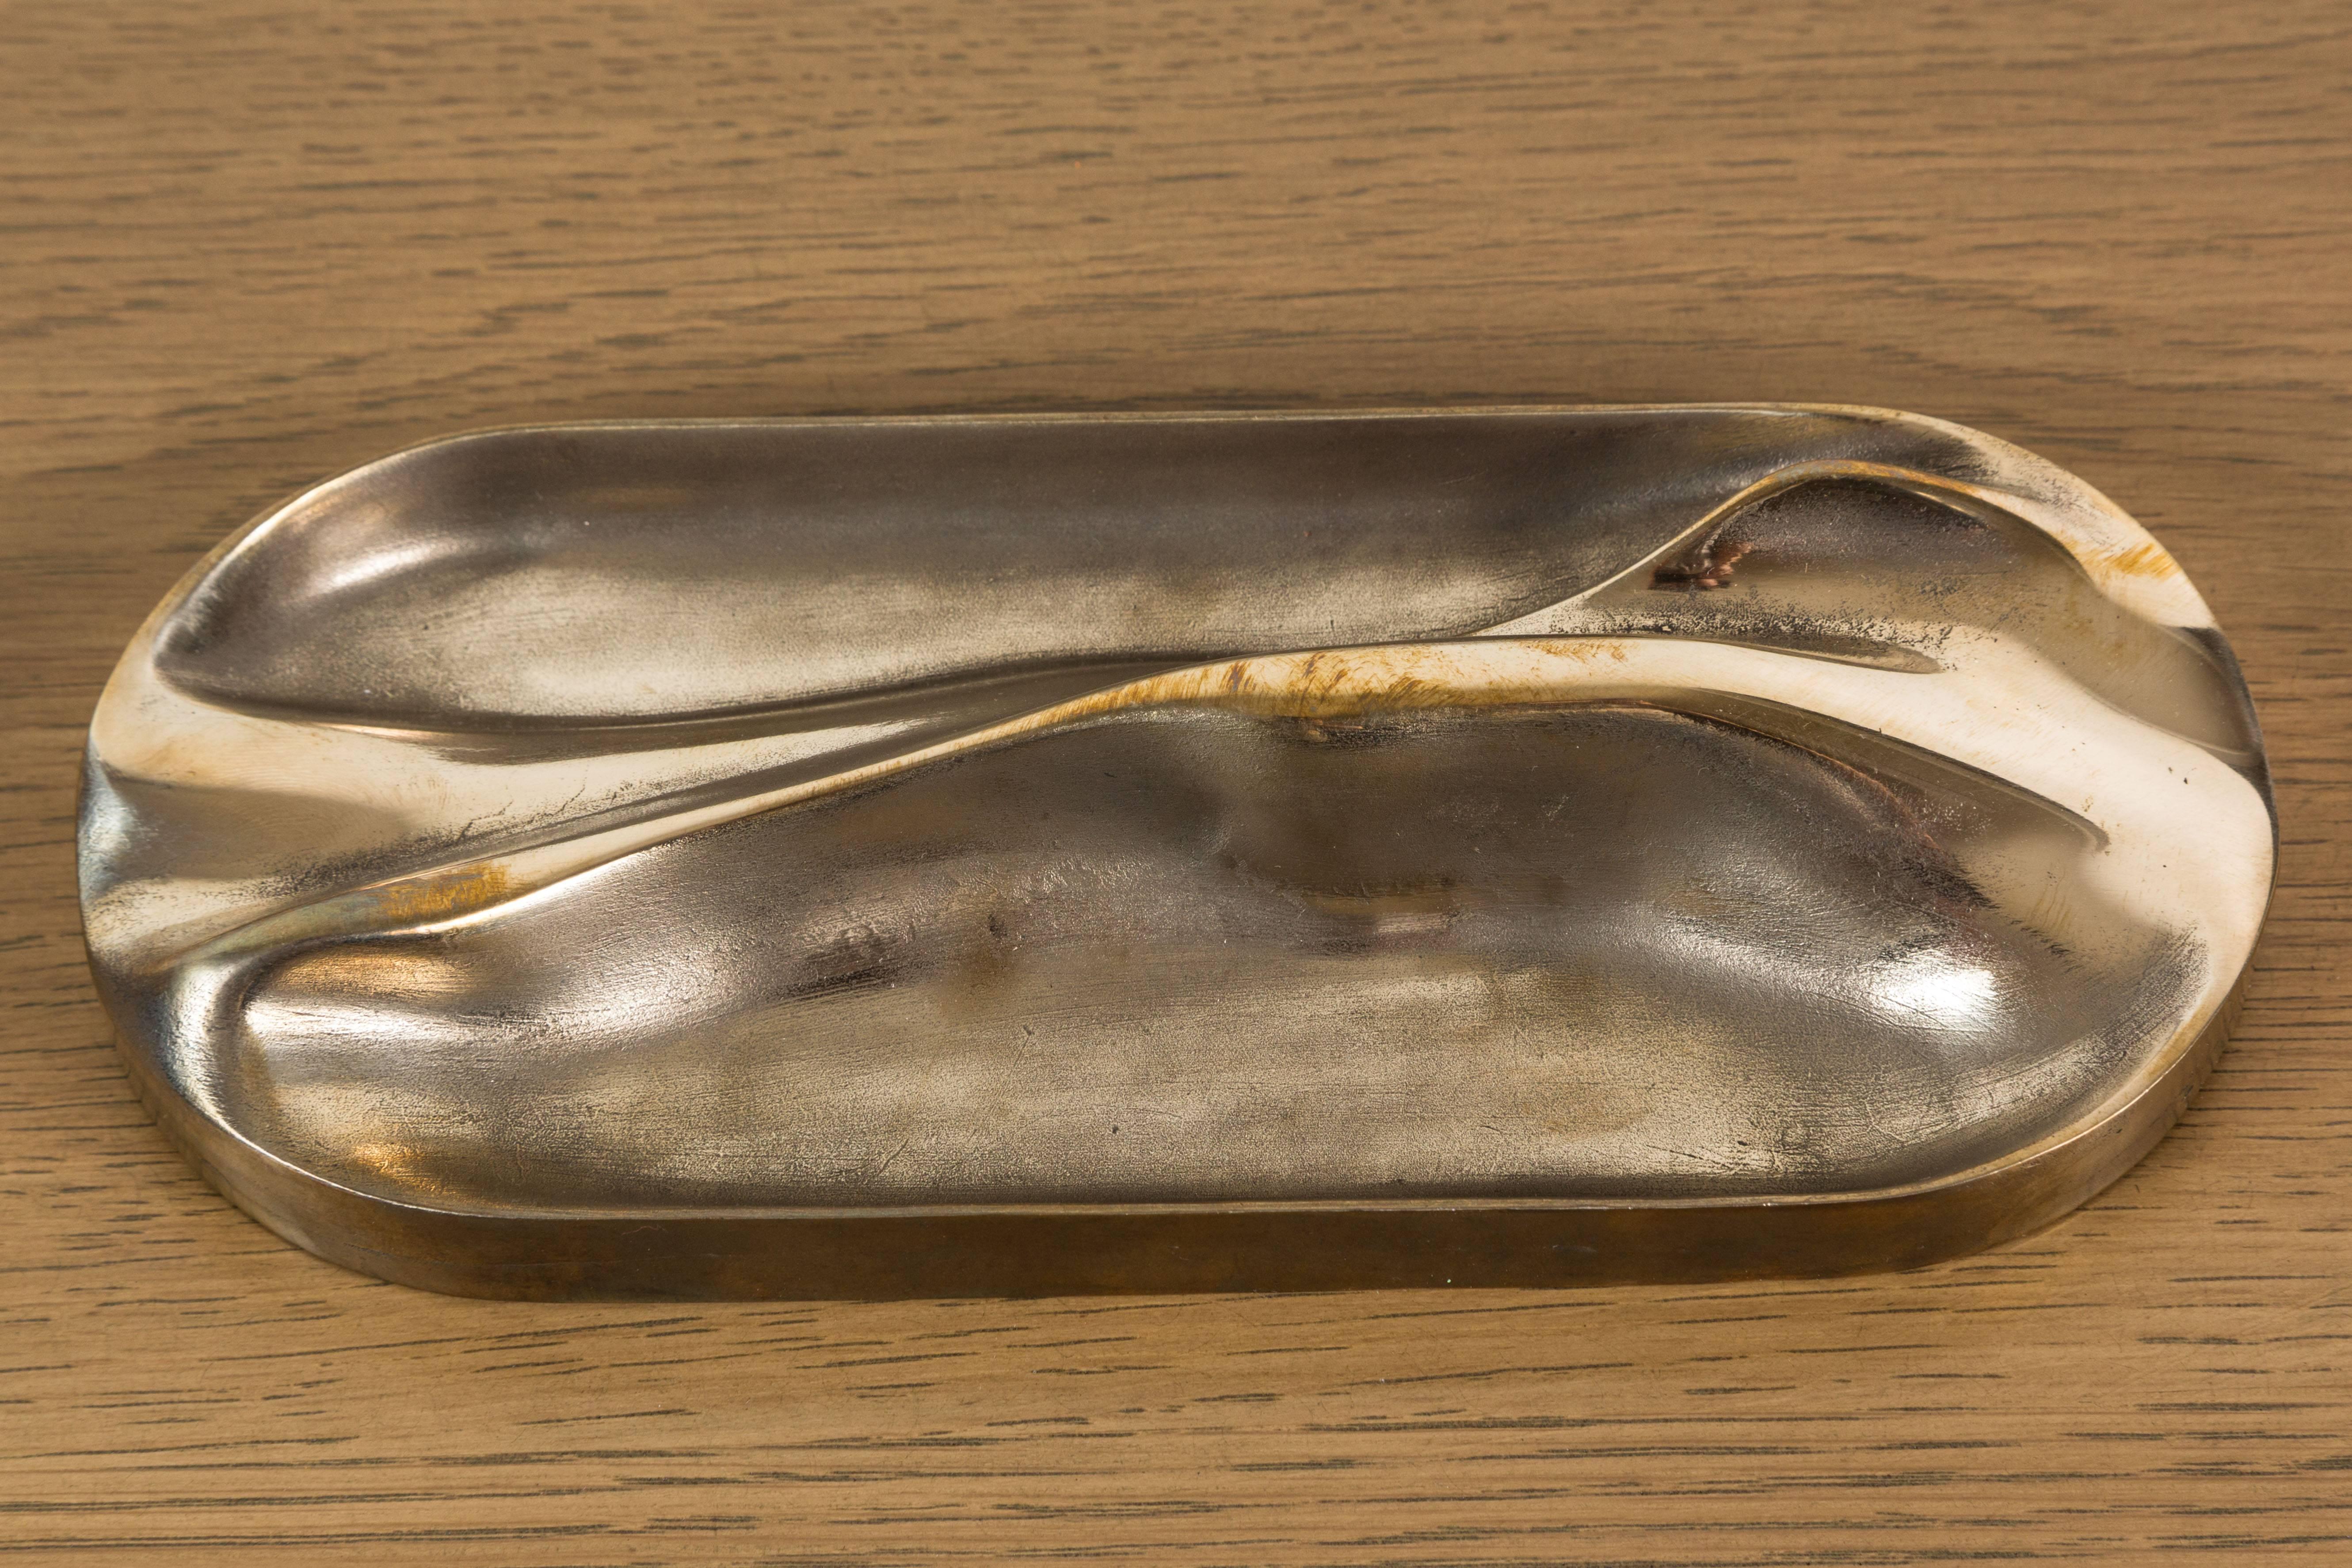 Small Bronze Tray by Artist Vincent Pocsik for Lawson-Fenning 1